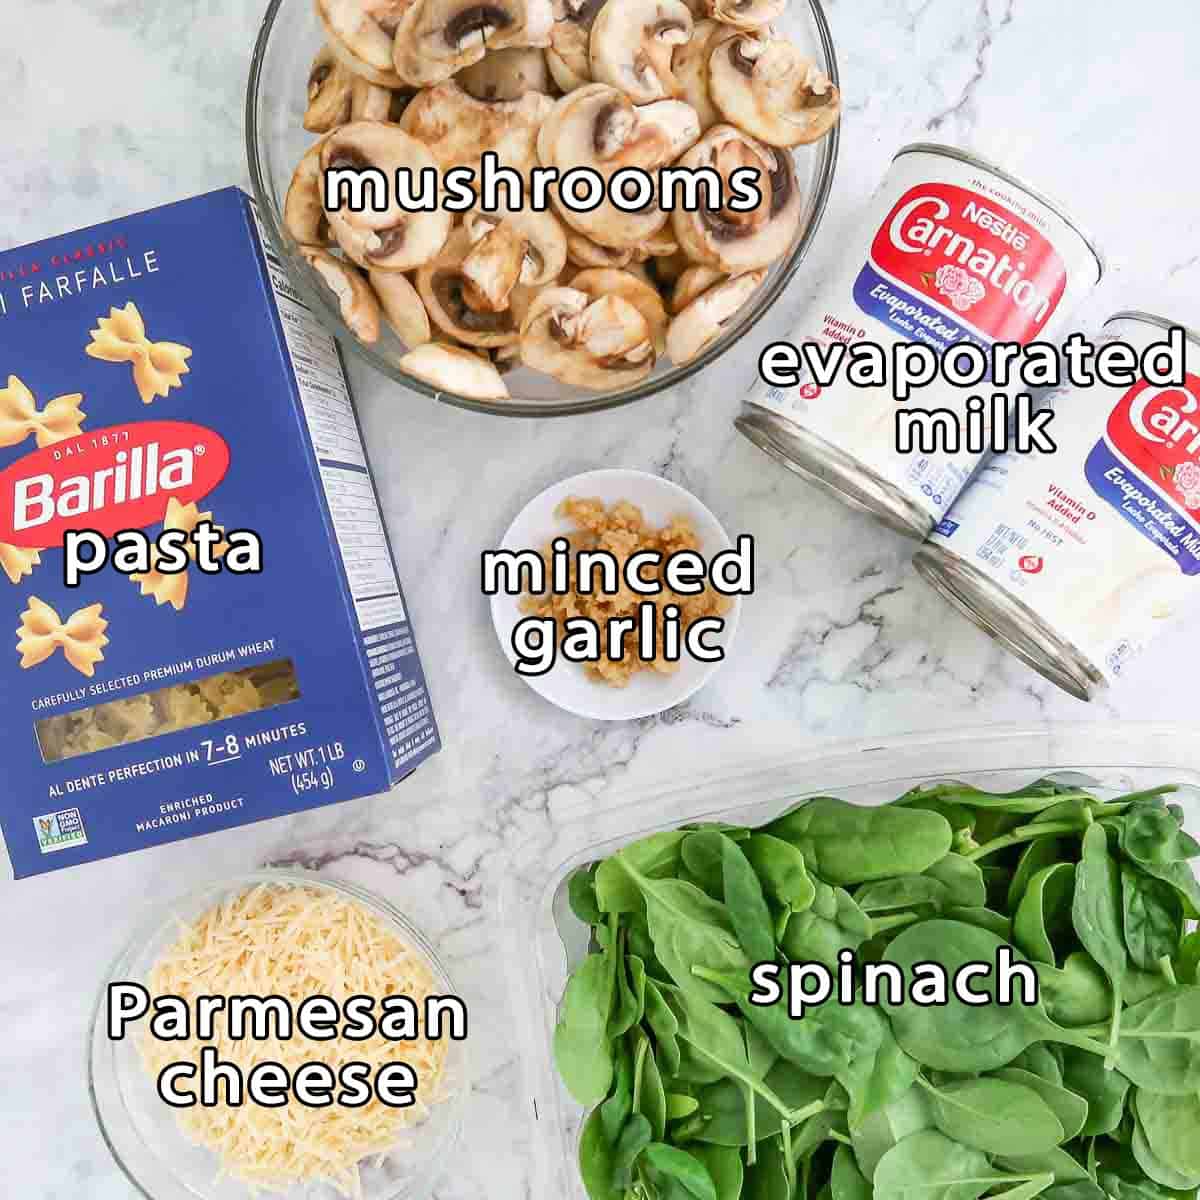 Overhead shot of ingredients - mushrooms, pasta, evaporated milk, minced garlic, parmesan cheese, and spinach.